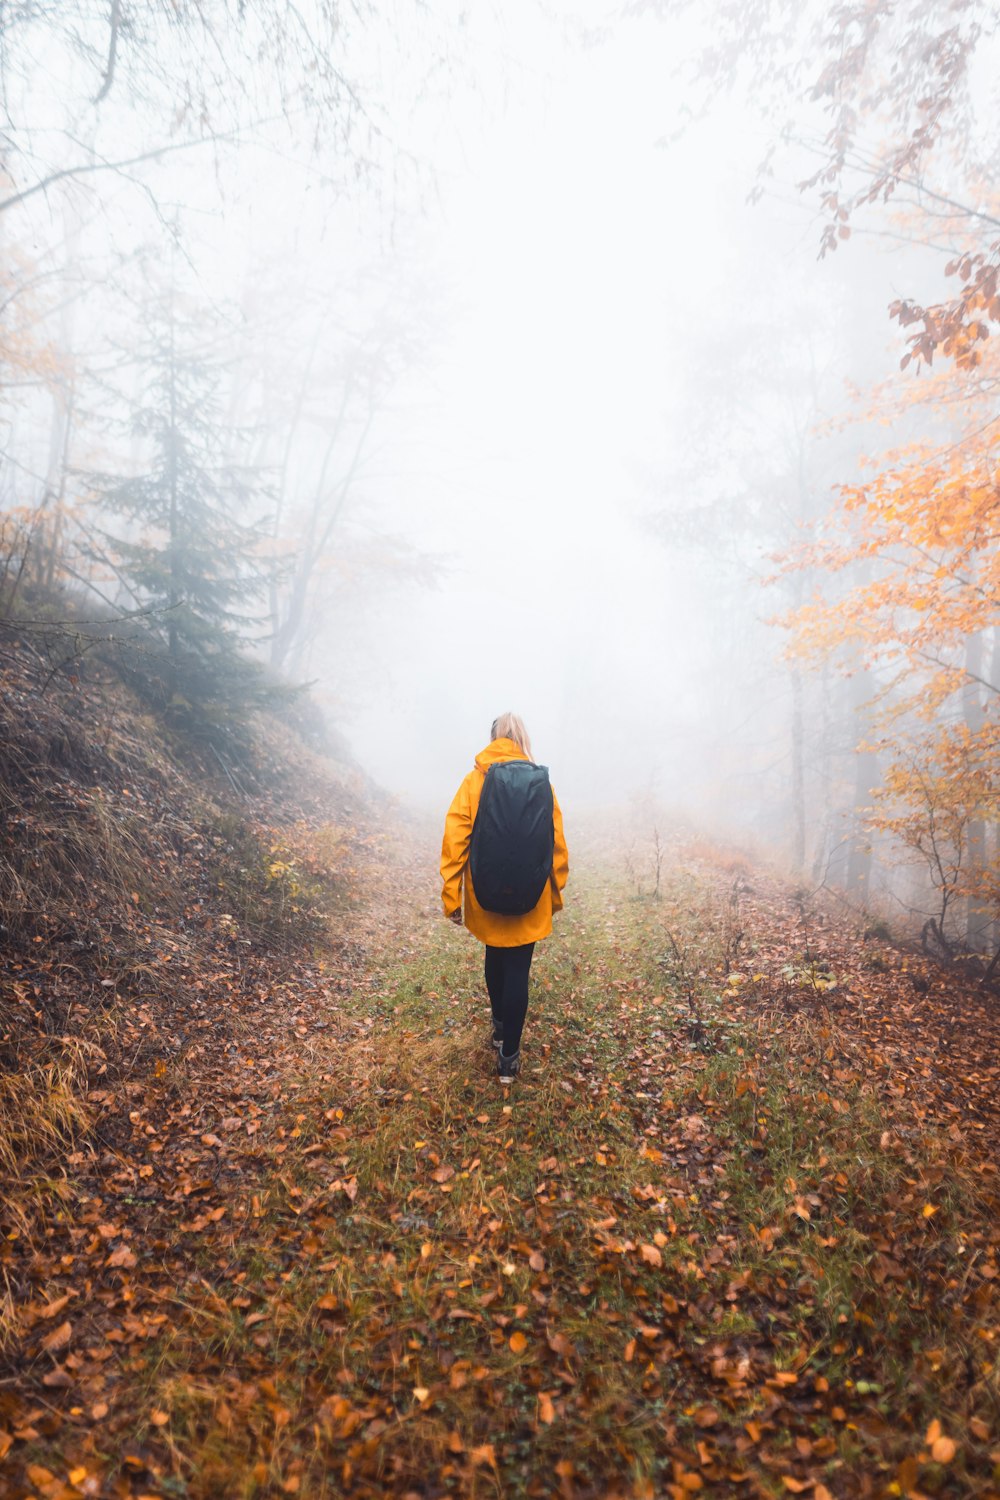 a person in a yellow jacket is walking through the woods